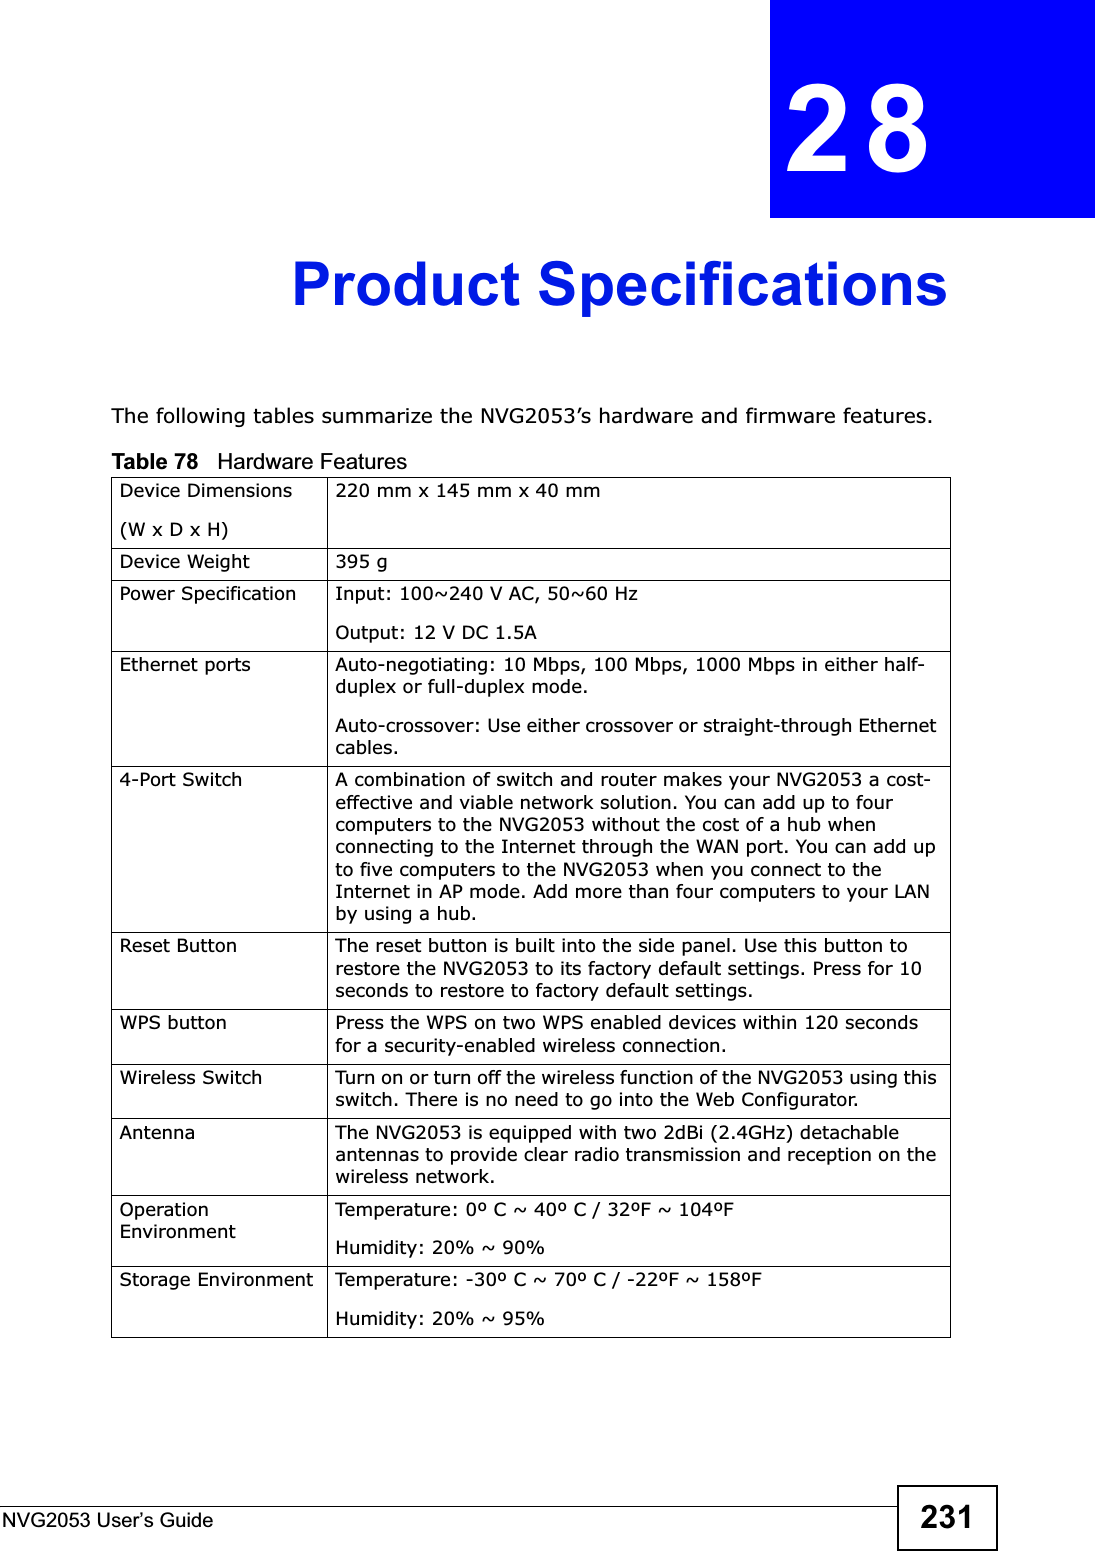 NVG2053 User’s Guide 231CHAPTER 28Product SpecificationsThe following tables summarize the NVG2053’s hardware and firmware features.Table 78   Hardware FeaturesDevice Dimensions (W x D x H) 220 mm x 145 mm x 40 mmDevice Weight 395 gPower Specification Input: 100~240 V AC, 50~60 HzOutput: 12 V DC 1.5AEthernet ports Auto-negotiating: 10 Mbps, 100 Mbps, 1000 Mbps in either half-duplex or full-duplex mode.Auto-crossover: Use either crossover or straight-through Ethernet cables.4-Port Switch A combination of switch and router makes your NVG2053 a cost-effective and viable network solution. You can add up to four computers to the NVG2053 without the cost of a hub when connecting to the Internet through the WAN port. You can add up to five computers to the NVG2053 when you connect to the Internet in AP mode. Add more than four computers to your LAN by using a hub.Reset Button The reset button is built into the side panel. Use this button to restore the NVG2053 to its factory default settings. Press for 10 seconds to restore to factory default settings.WPS button Press the WPS on two WPS enabled devices within 120 seconds for a security-enabled wireless connection.Wireless Switch Turn on or turn off the wireless function of the NVG2053 using this switch. There is no need to go into the Web Configurator. Antenna The NVG2053 is equipped with two 2dBi (2.4GHz) detachable antennas to provide clear radio transmission and reception on the wireless network. Operation EnvironmentTemperature: 0º C ~ 40º C / 32ºF ~ 104ºFHumidity: 20% ~ 90% Storage Environment Temperature: -30º C ~ 70º C / -22ºF ~ 158ºFHumidity: 20% ~ 95% 